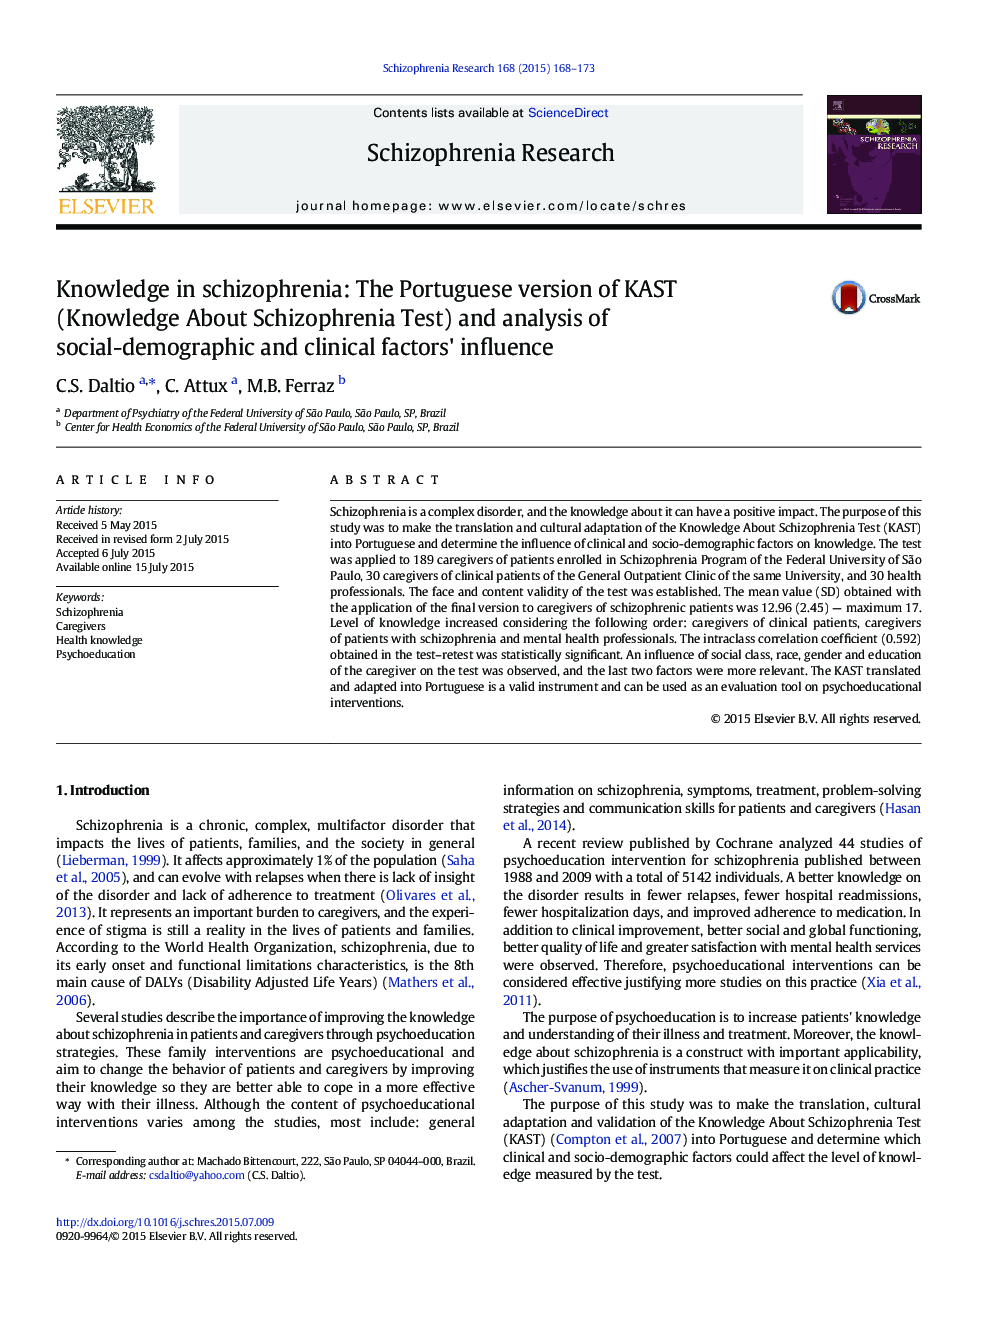 Knowledge in schizophrenia: The Portuguese version of KAST (Knowledge About Schizophrenia Test) and analysis of social-demographic and clinical factors' influence